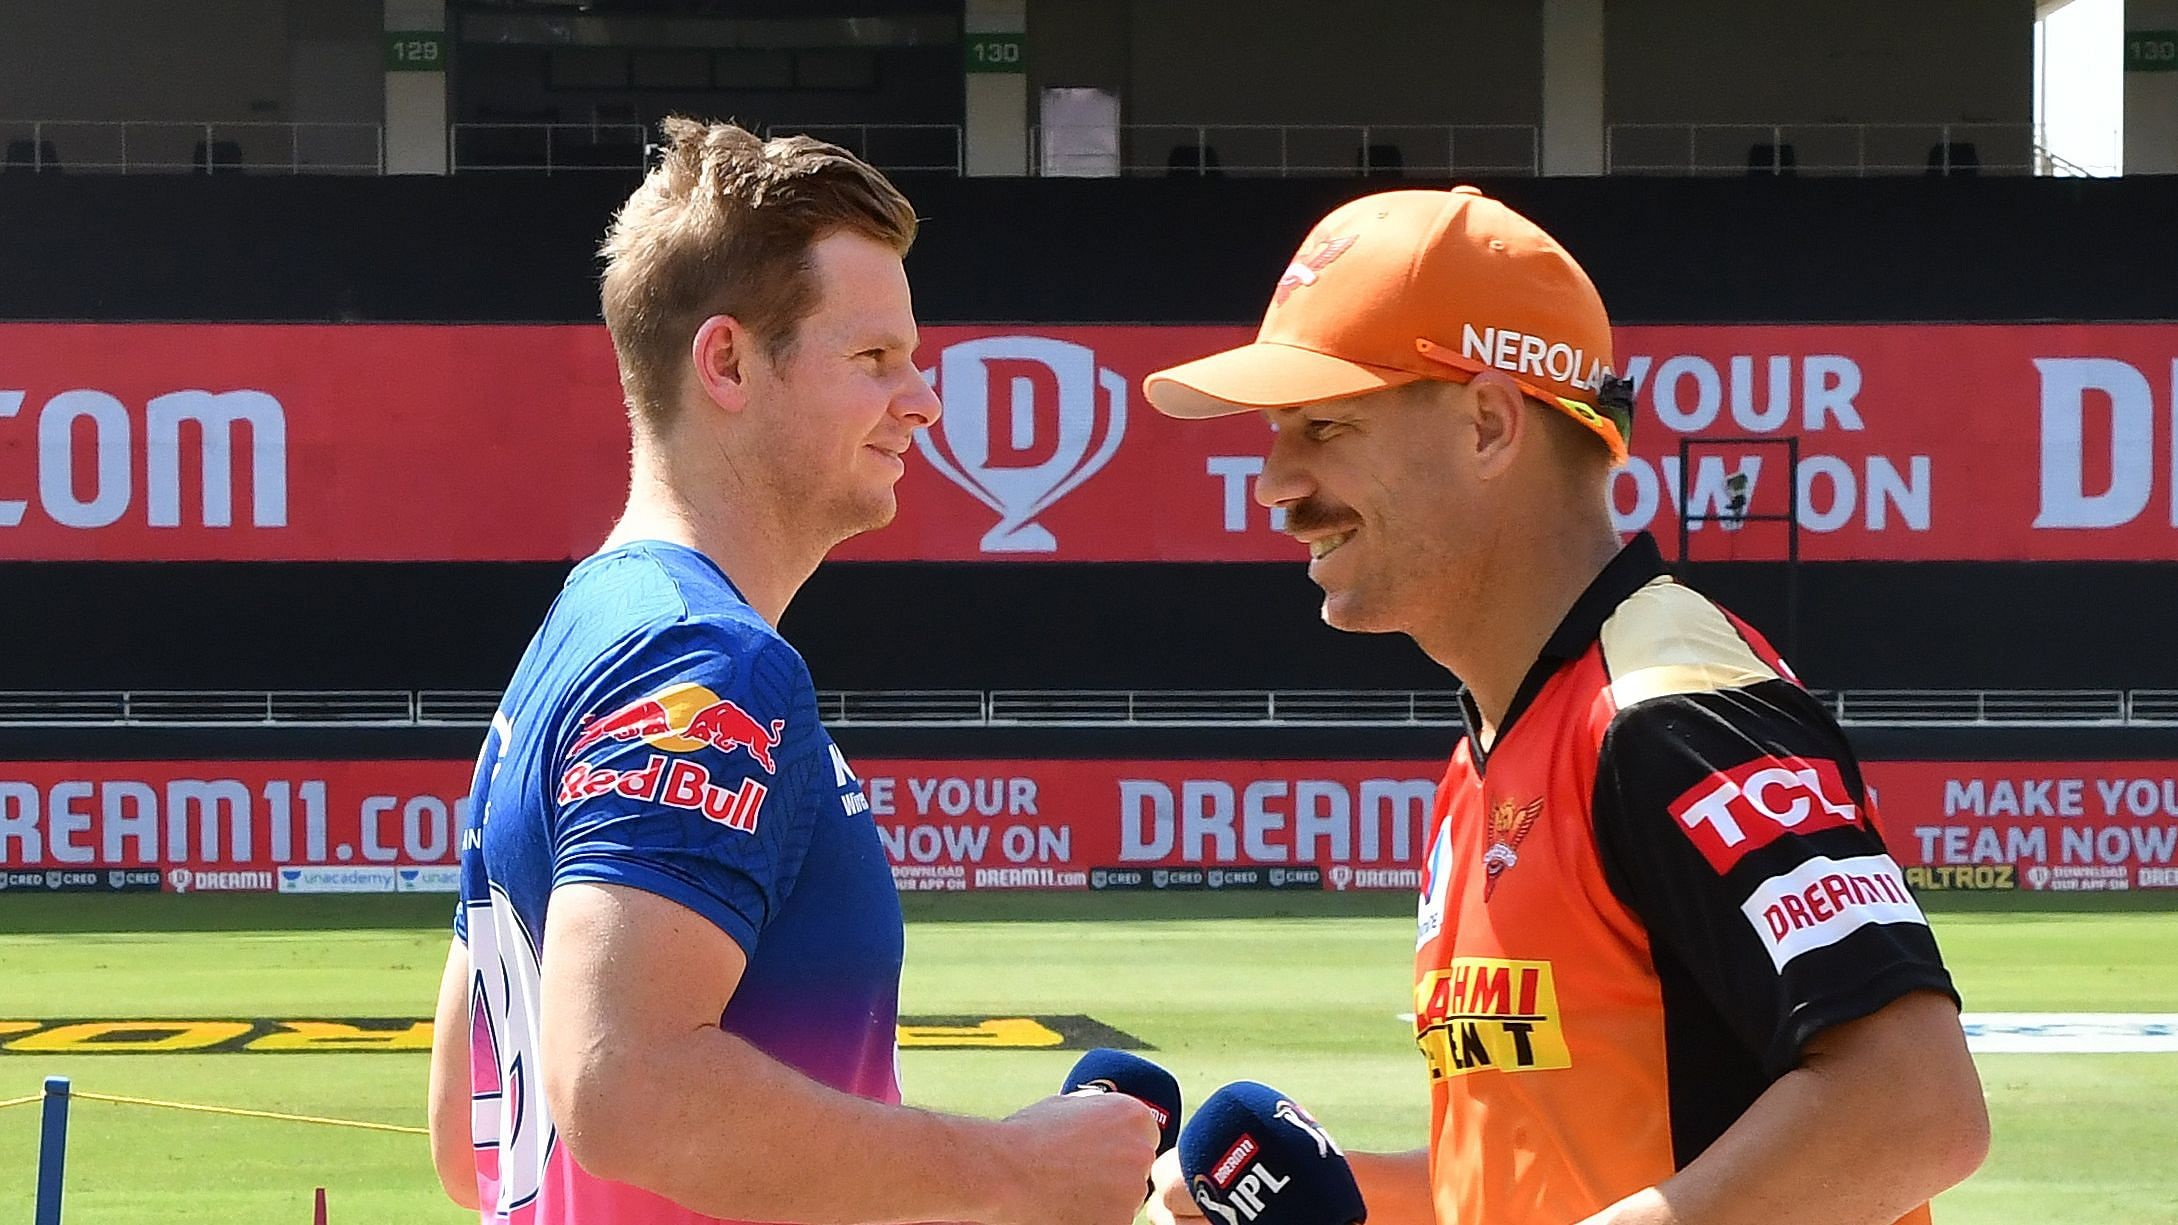 IPL: Rajasthan Royals to take on Sunrisers Hyderabad in Dubai today